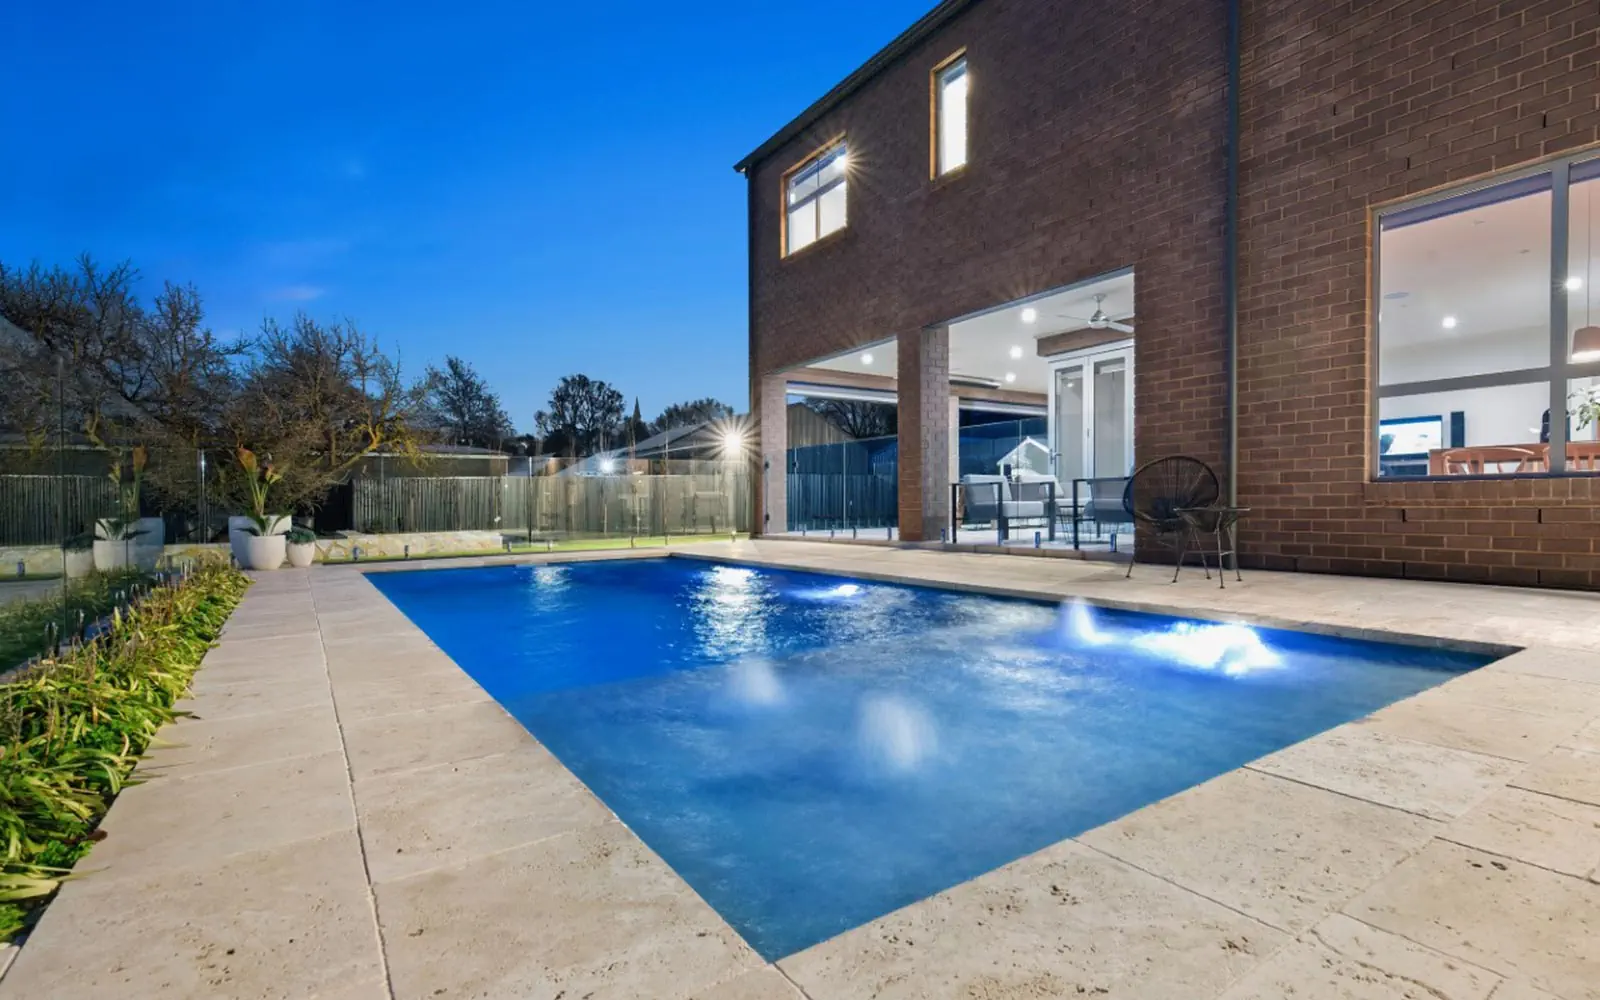 The Reflection fibreglass swimming pool with Splash Deck